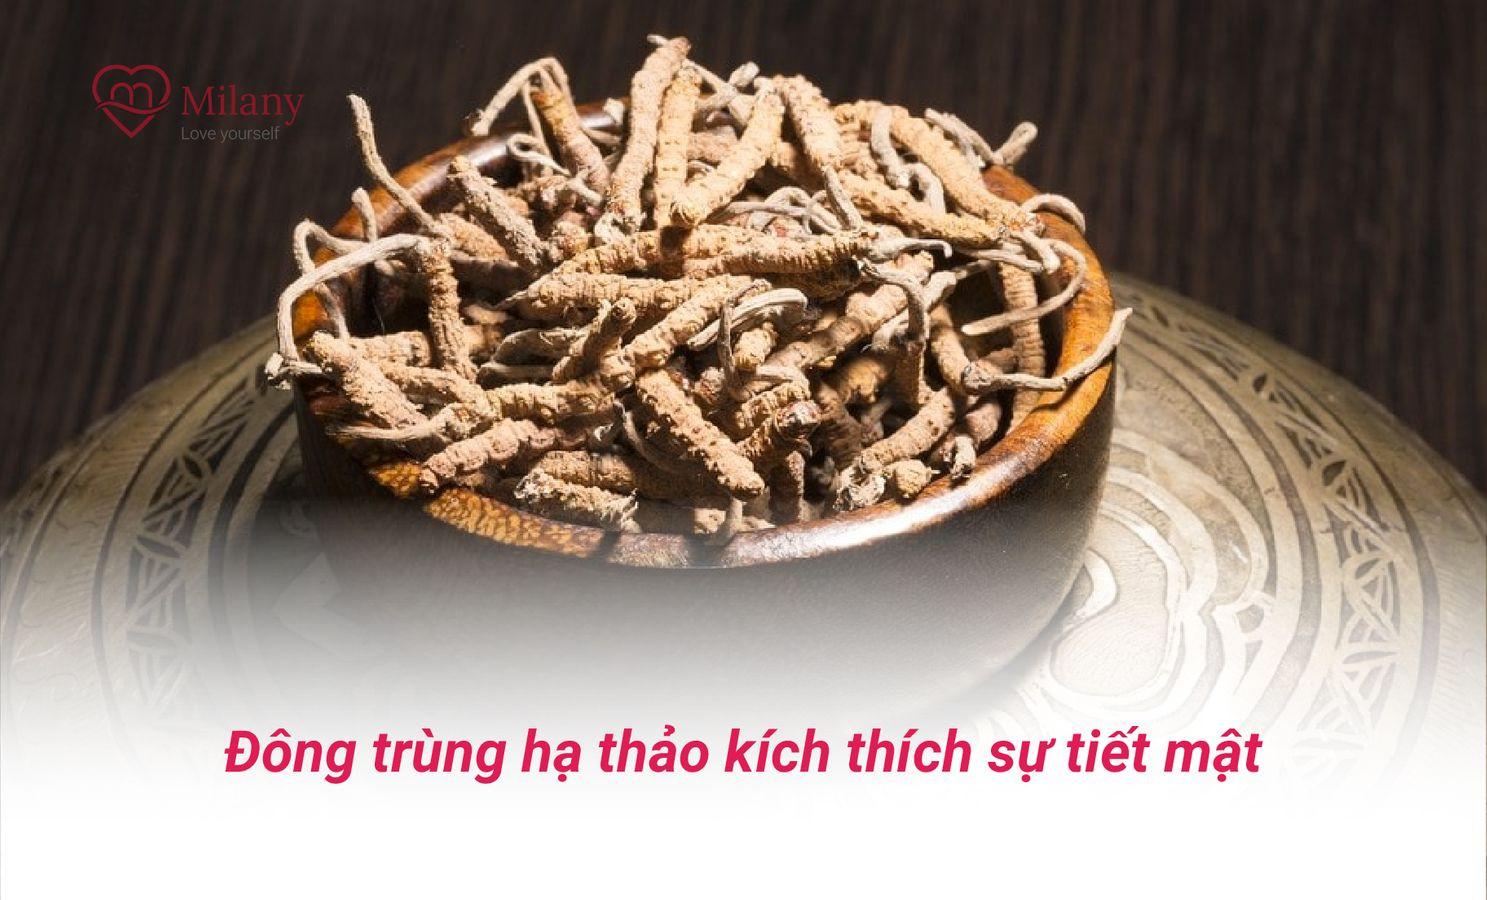 dong trung ha thao kich thich su tiet mat